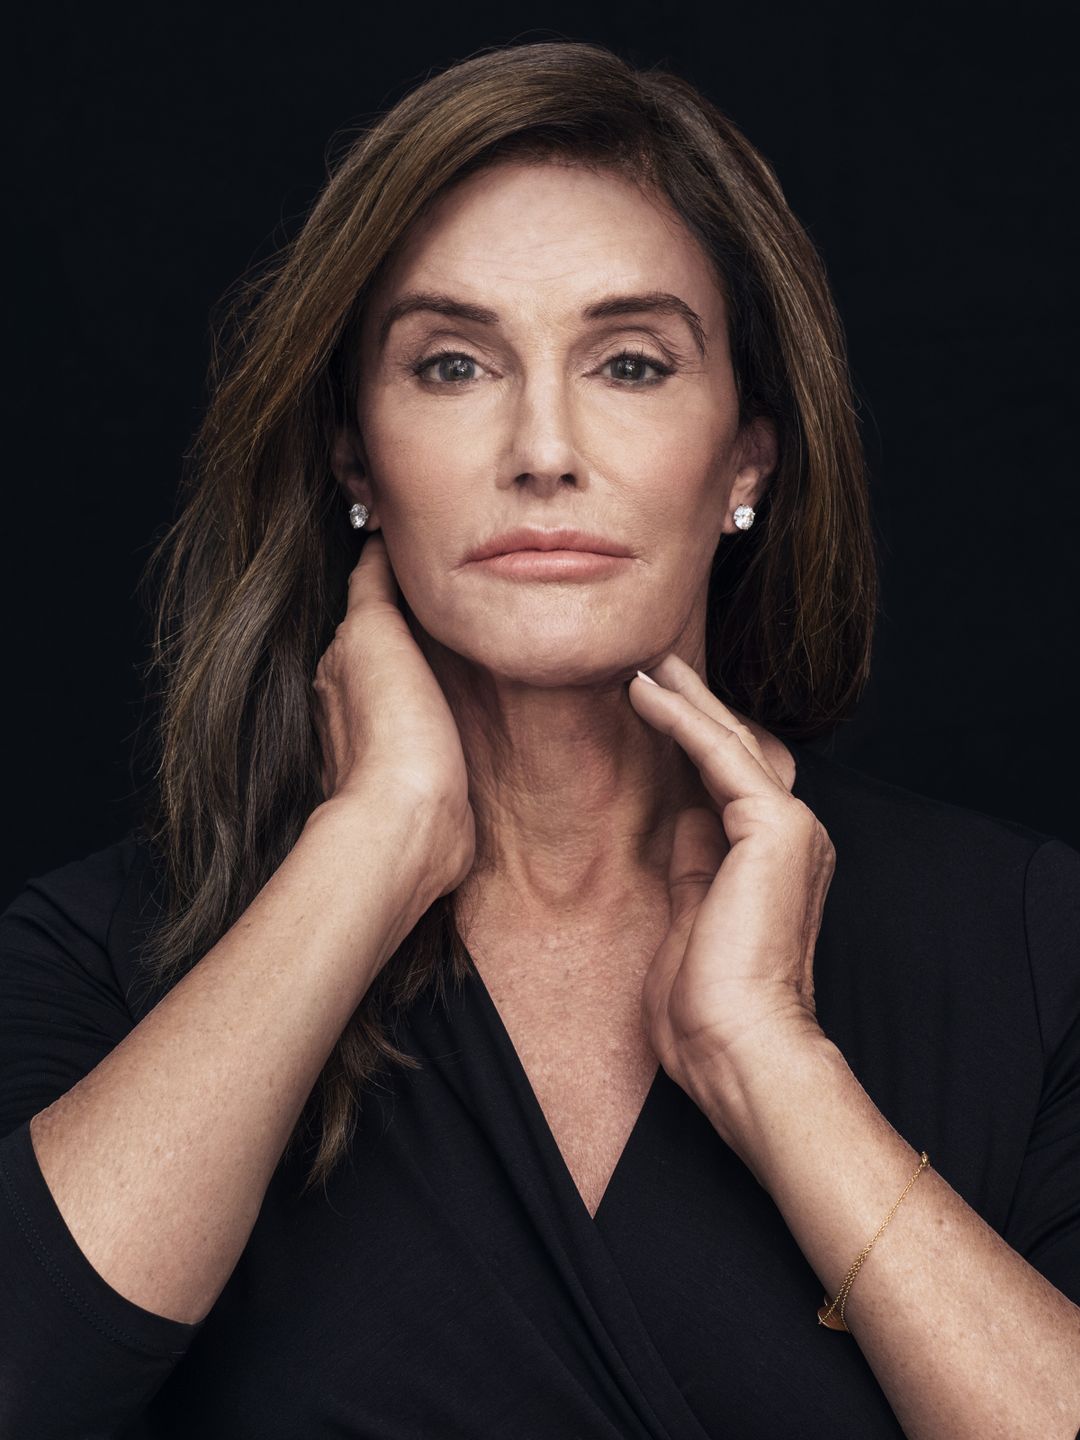 Caitlyn Jenner current look